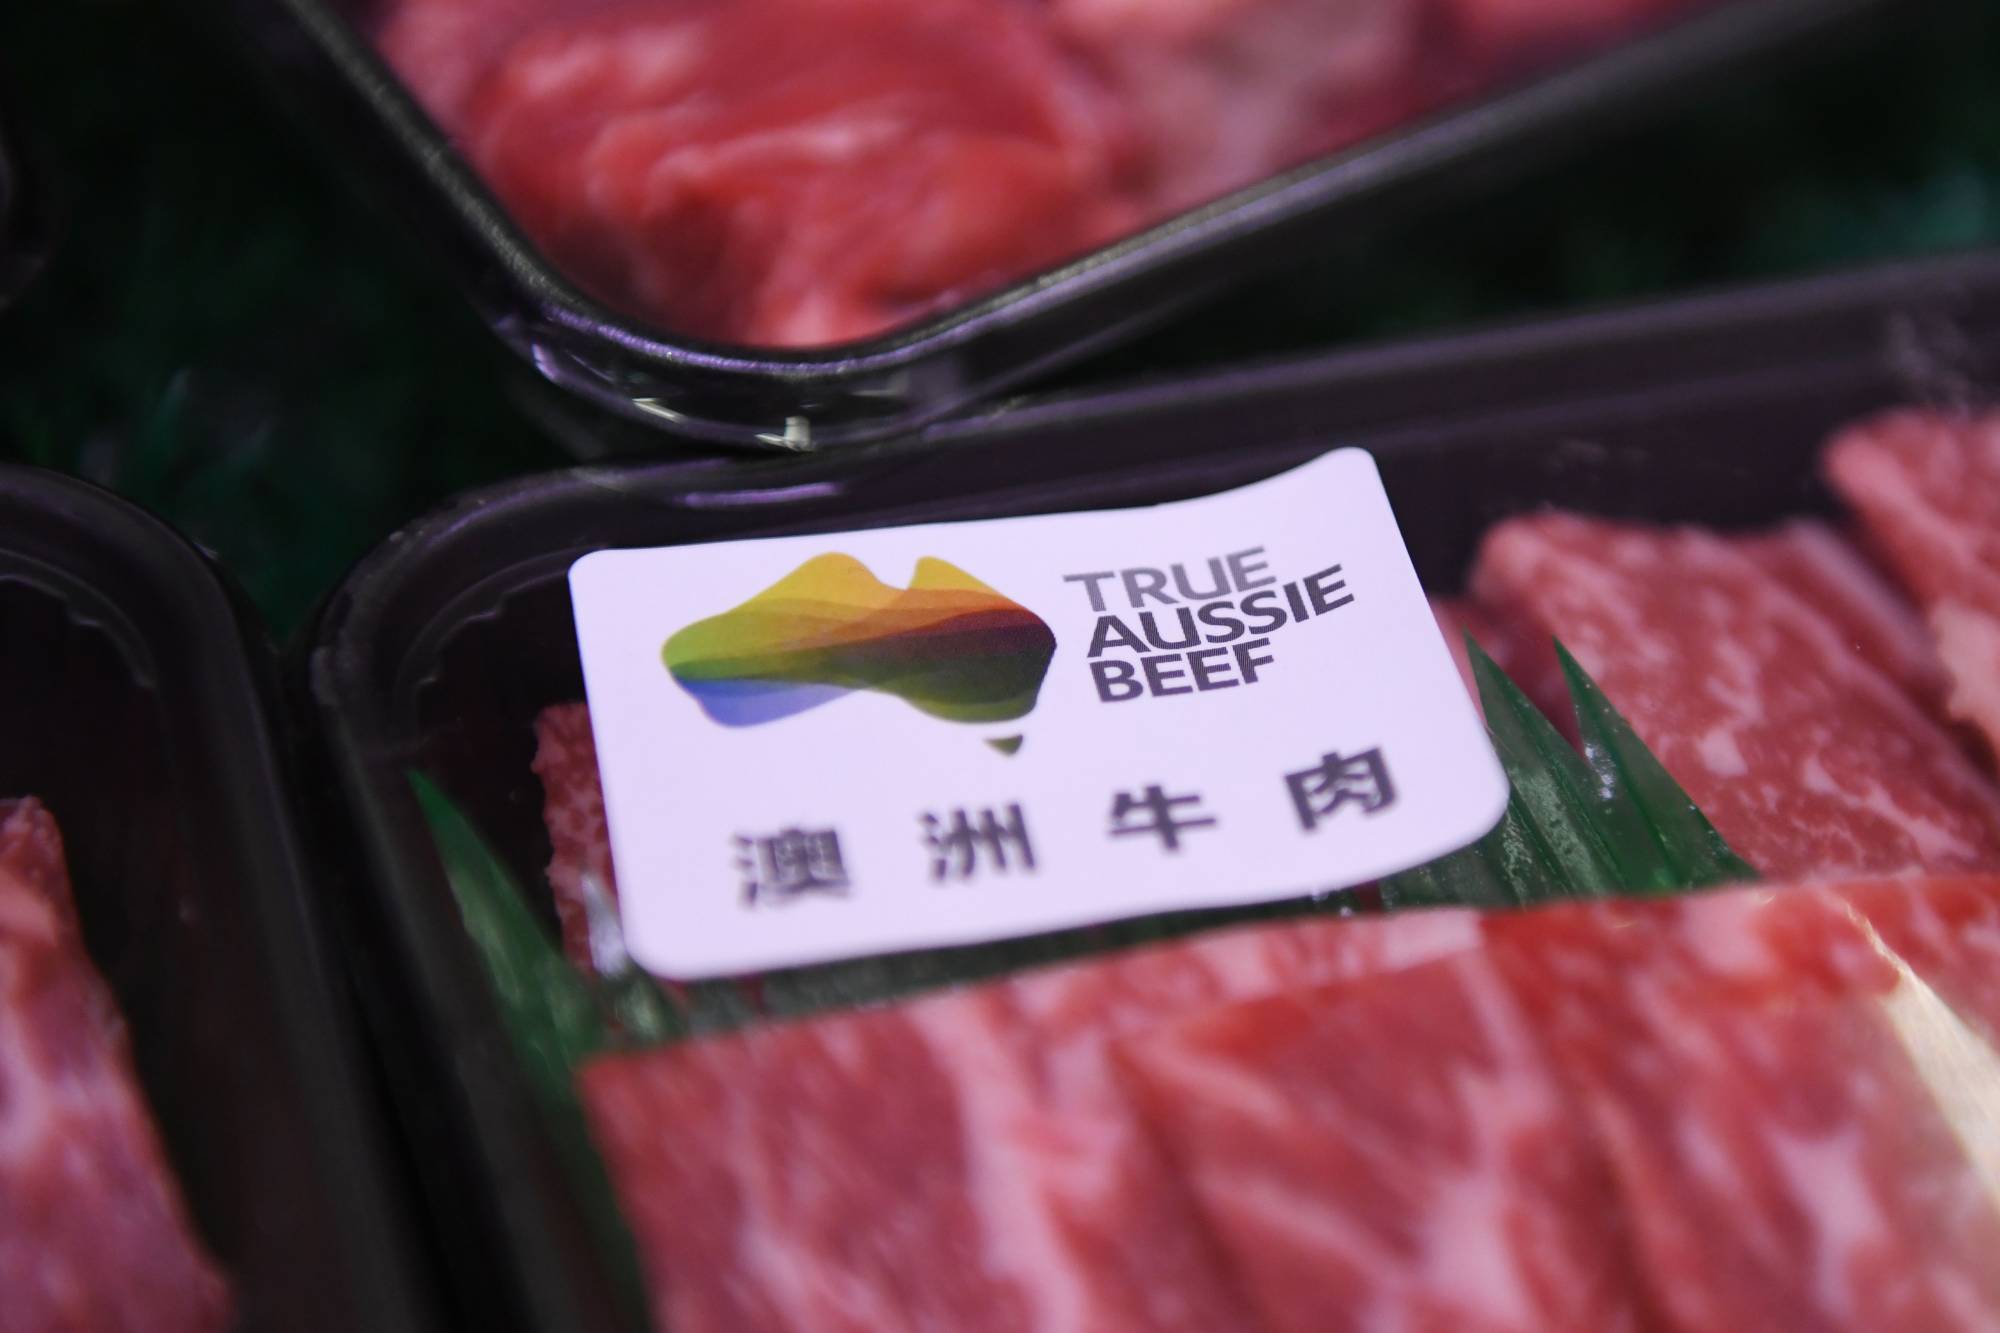 Australian beef is seen at a supermarket in Beijing on Monday. That day China suspended imports from four major Australian beef suppliers, weeks after Beijing's ambassador warned of a consumer boycott in retaliation for Canberra's push to probe the origins of the coronavirus pandemic. | AFP-JIJI